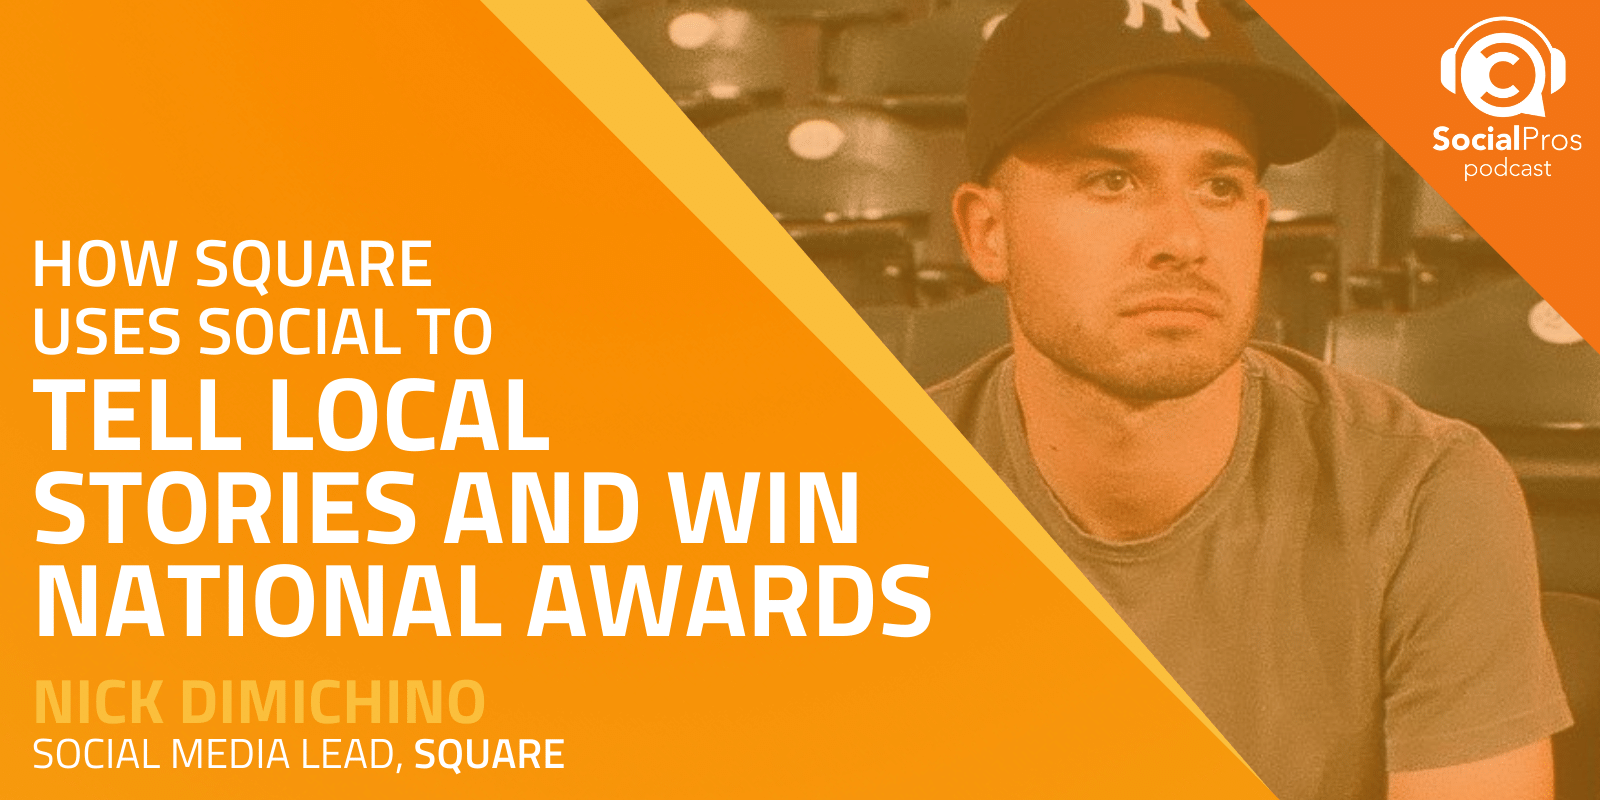 How Square uses Social to Tell Local Stories and Win National Awards